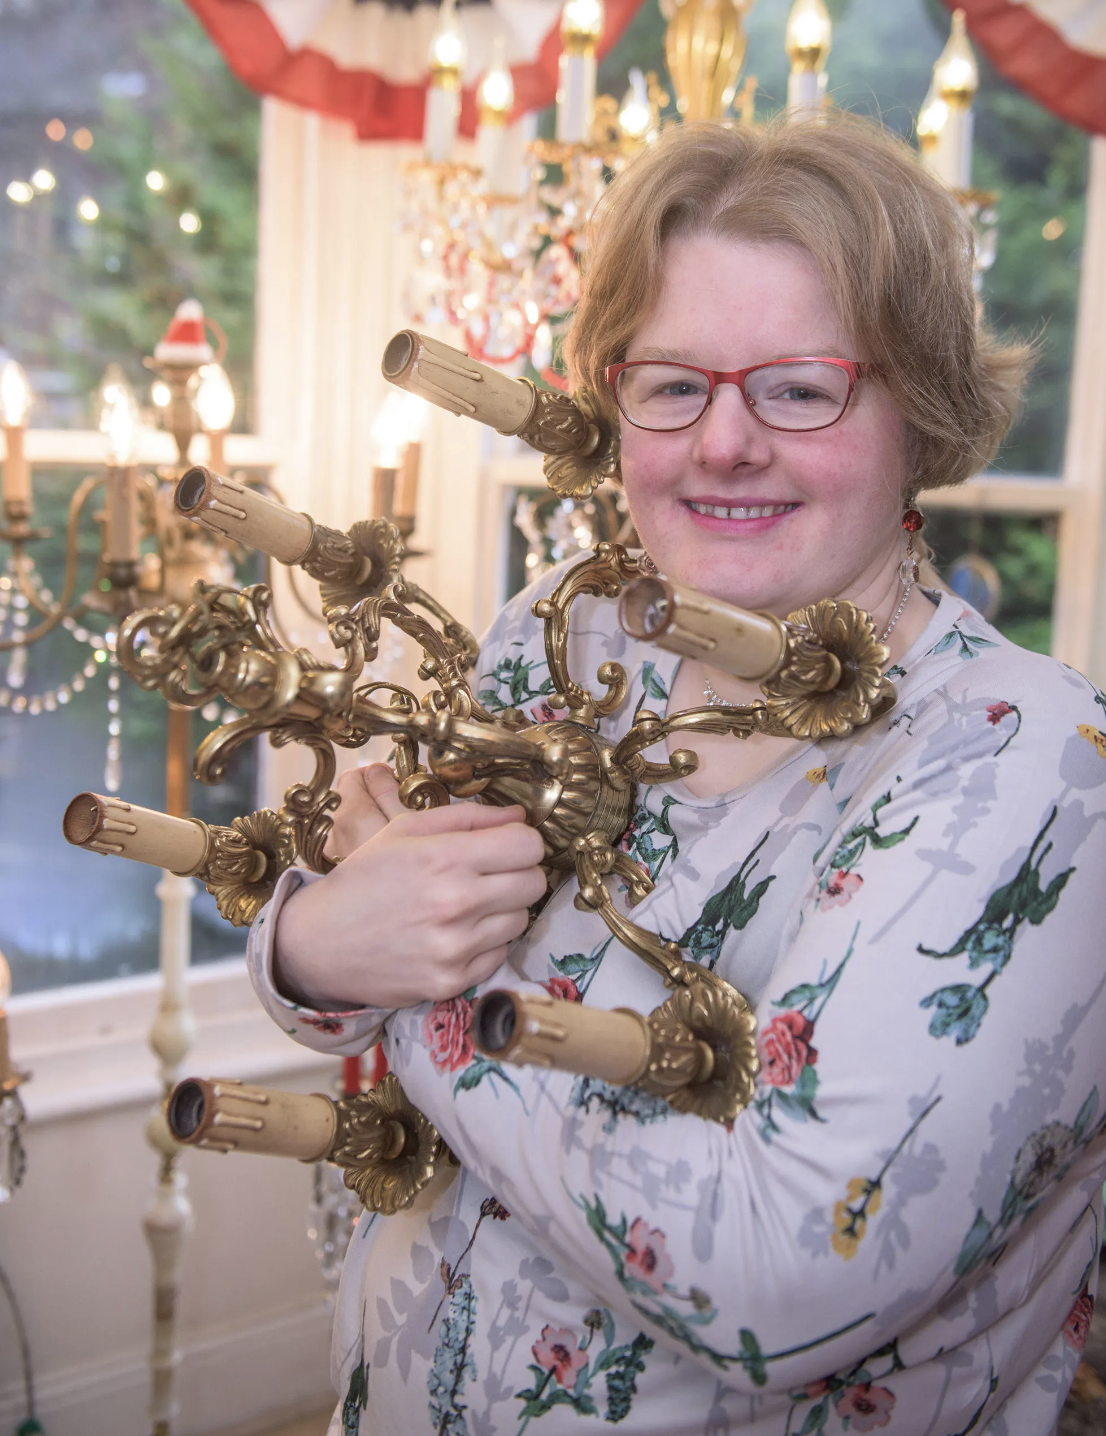 While she may have previously had a fling with the Statue of Liberty, Amanda Liberty found love again … this time in a 91-year-old chandelier named Lumiere.  “I’m determined to have this commitment ceremony, to prove that I’m here for Lumiere and that my love is going to last,” she said of her glowing groom in 2019. 